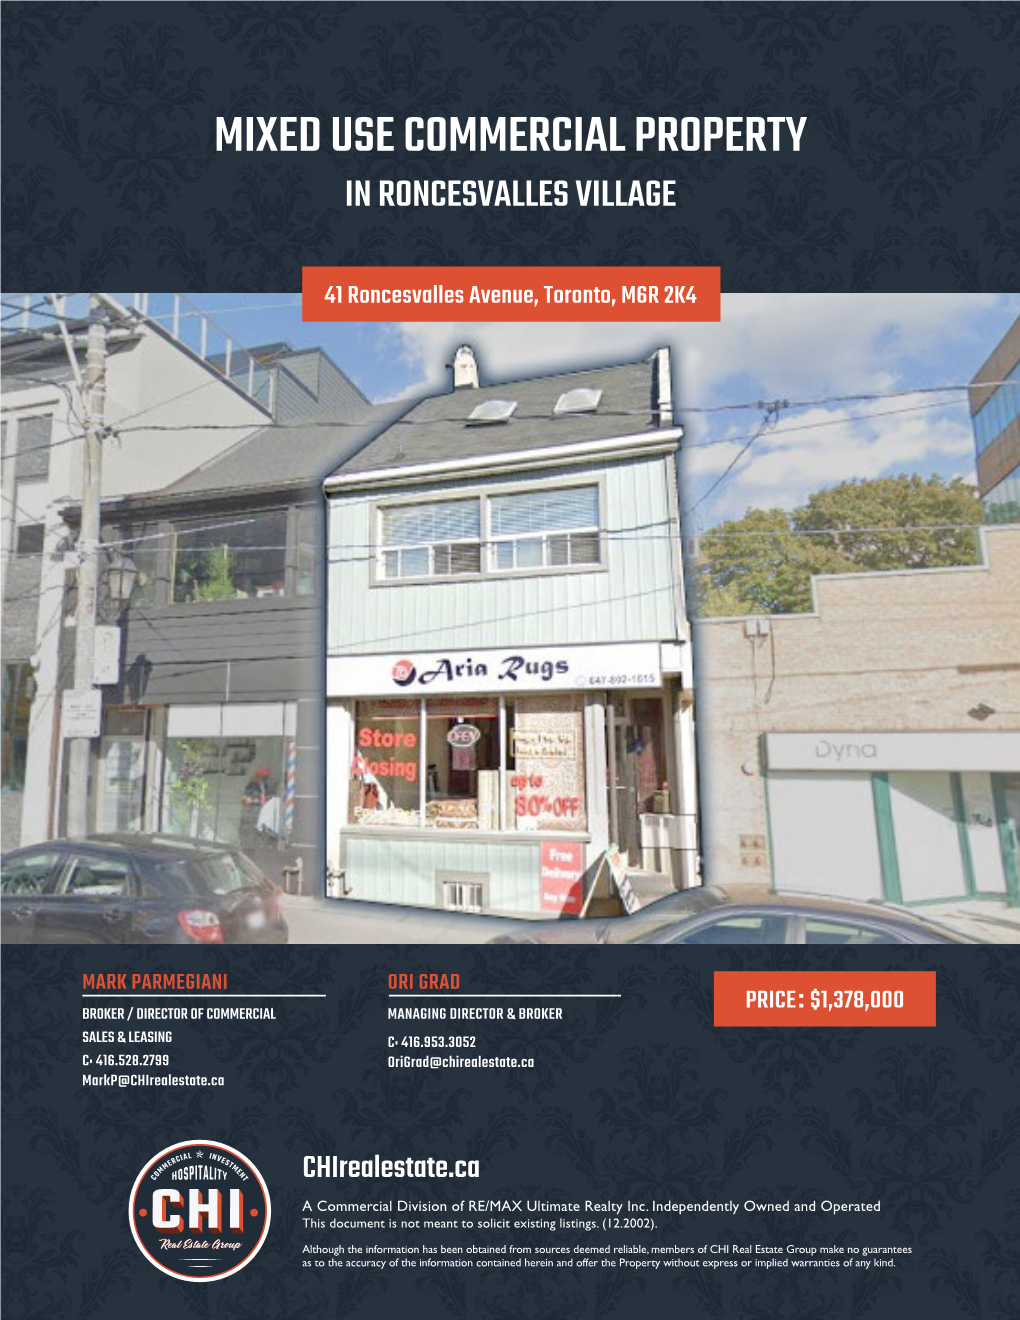 Mixed Use Commercial Property in Roncesvalles Village